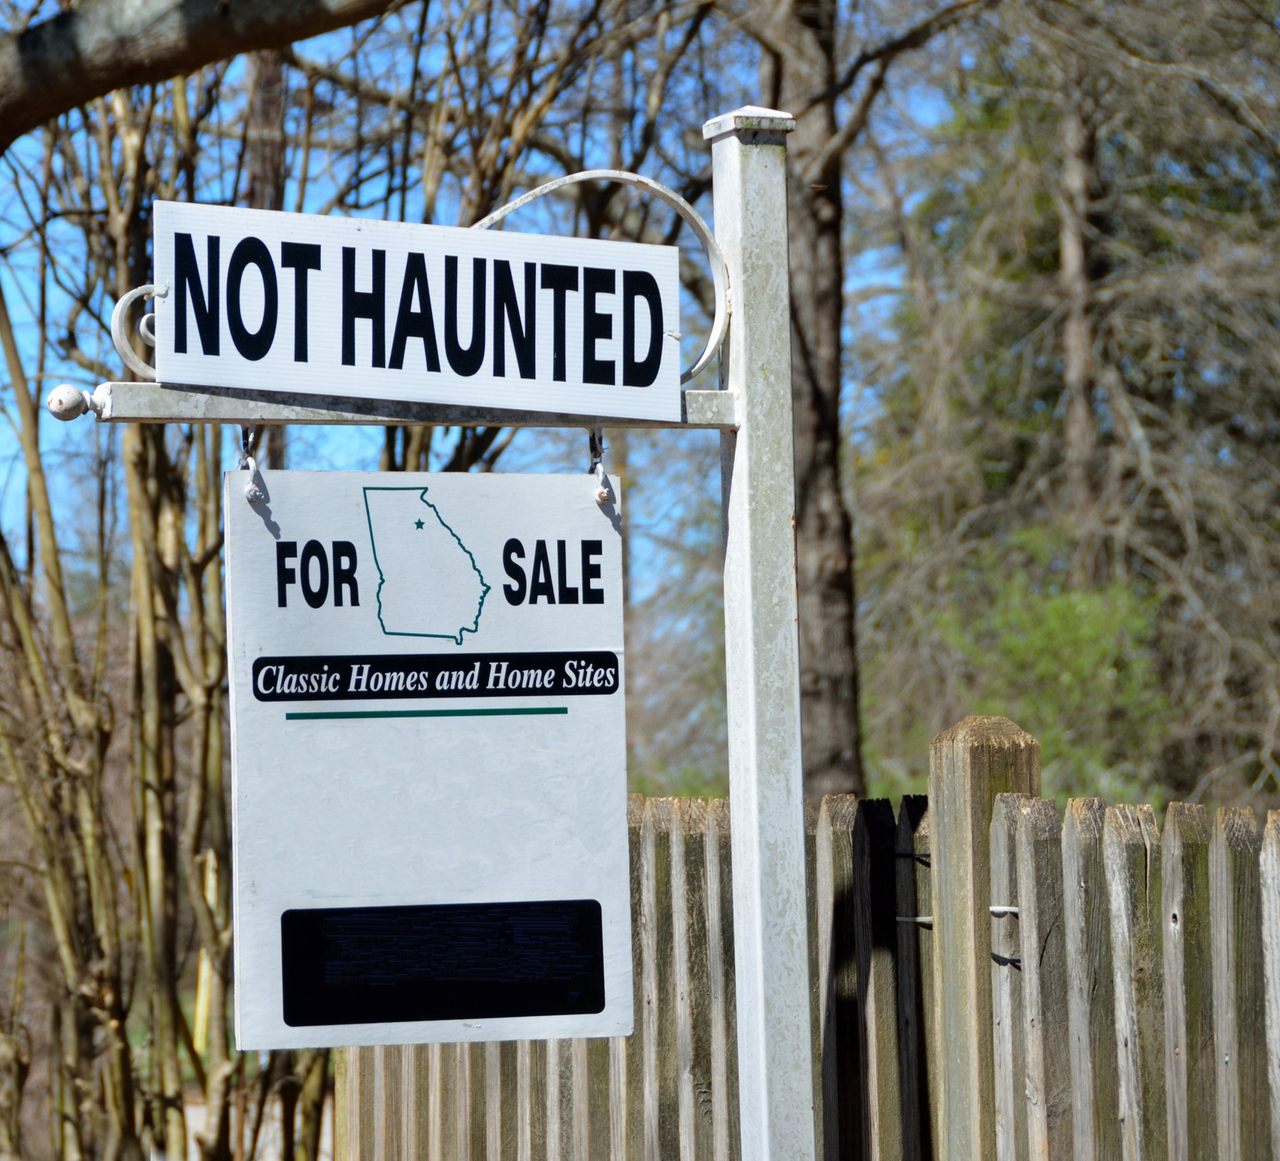 Selling a supposedly haunted home isn't as difficult as one might think.